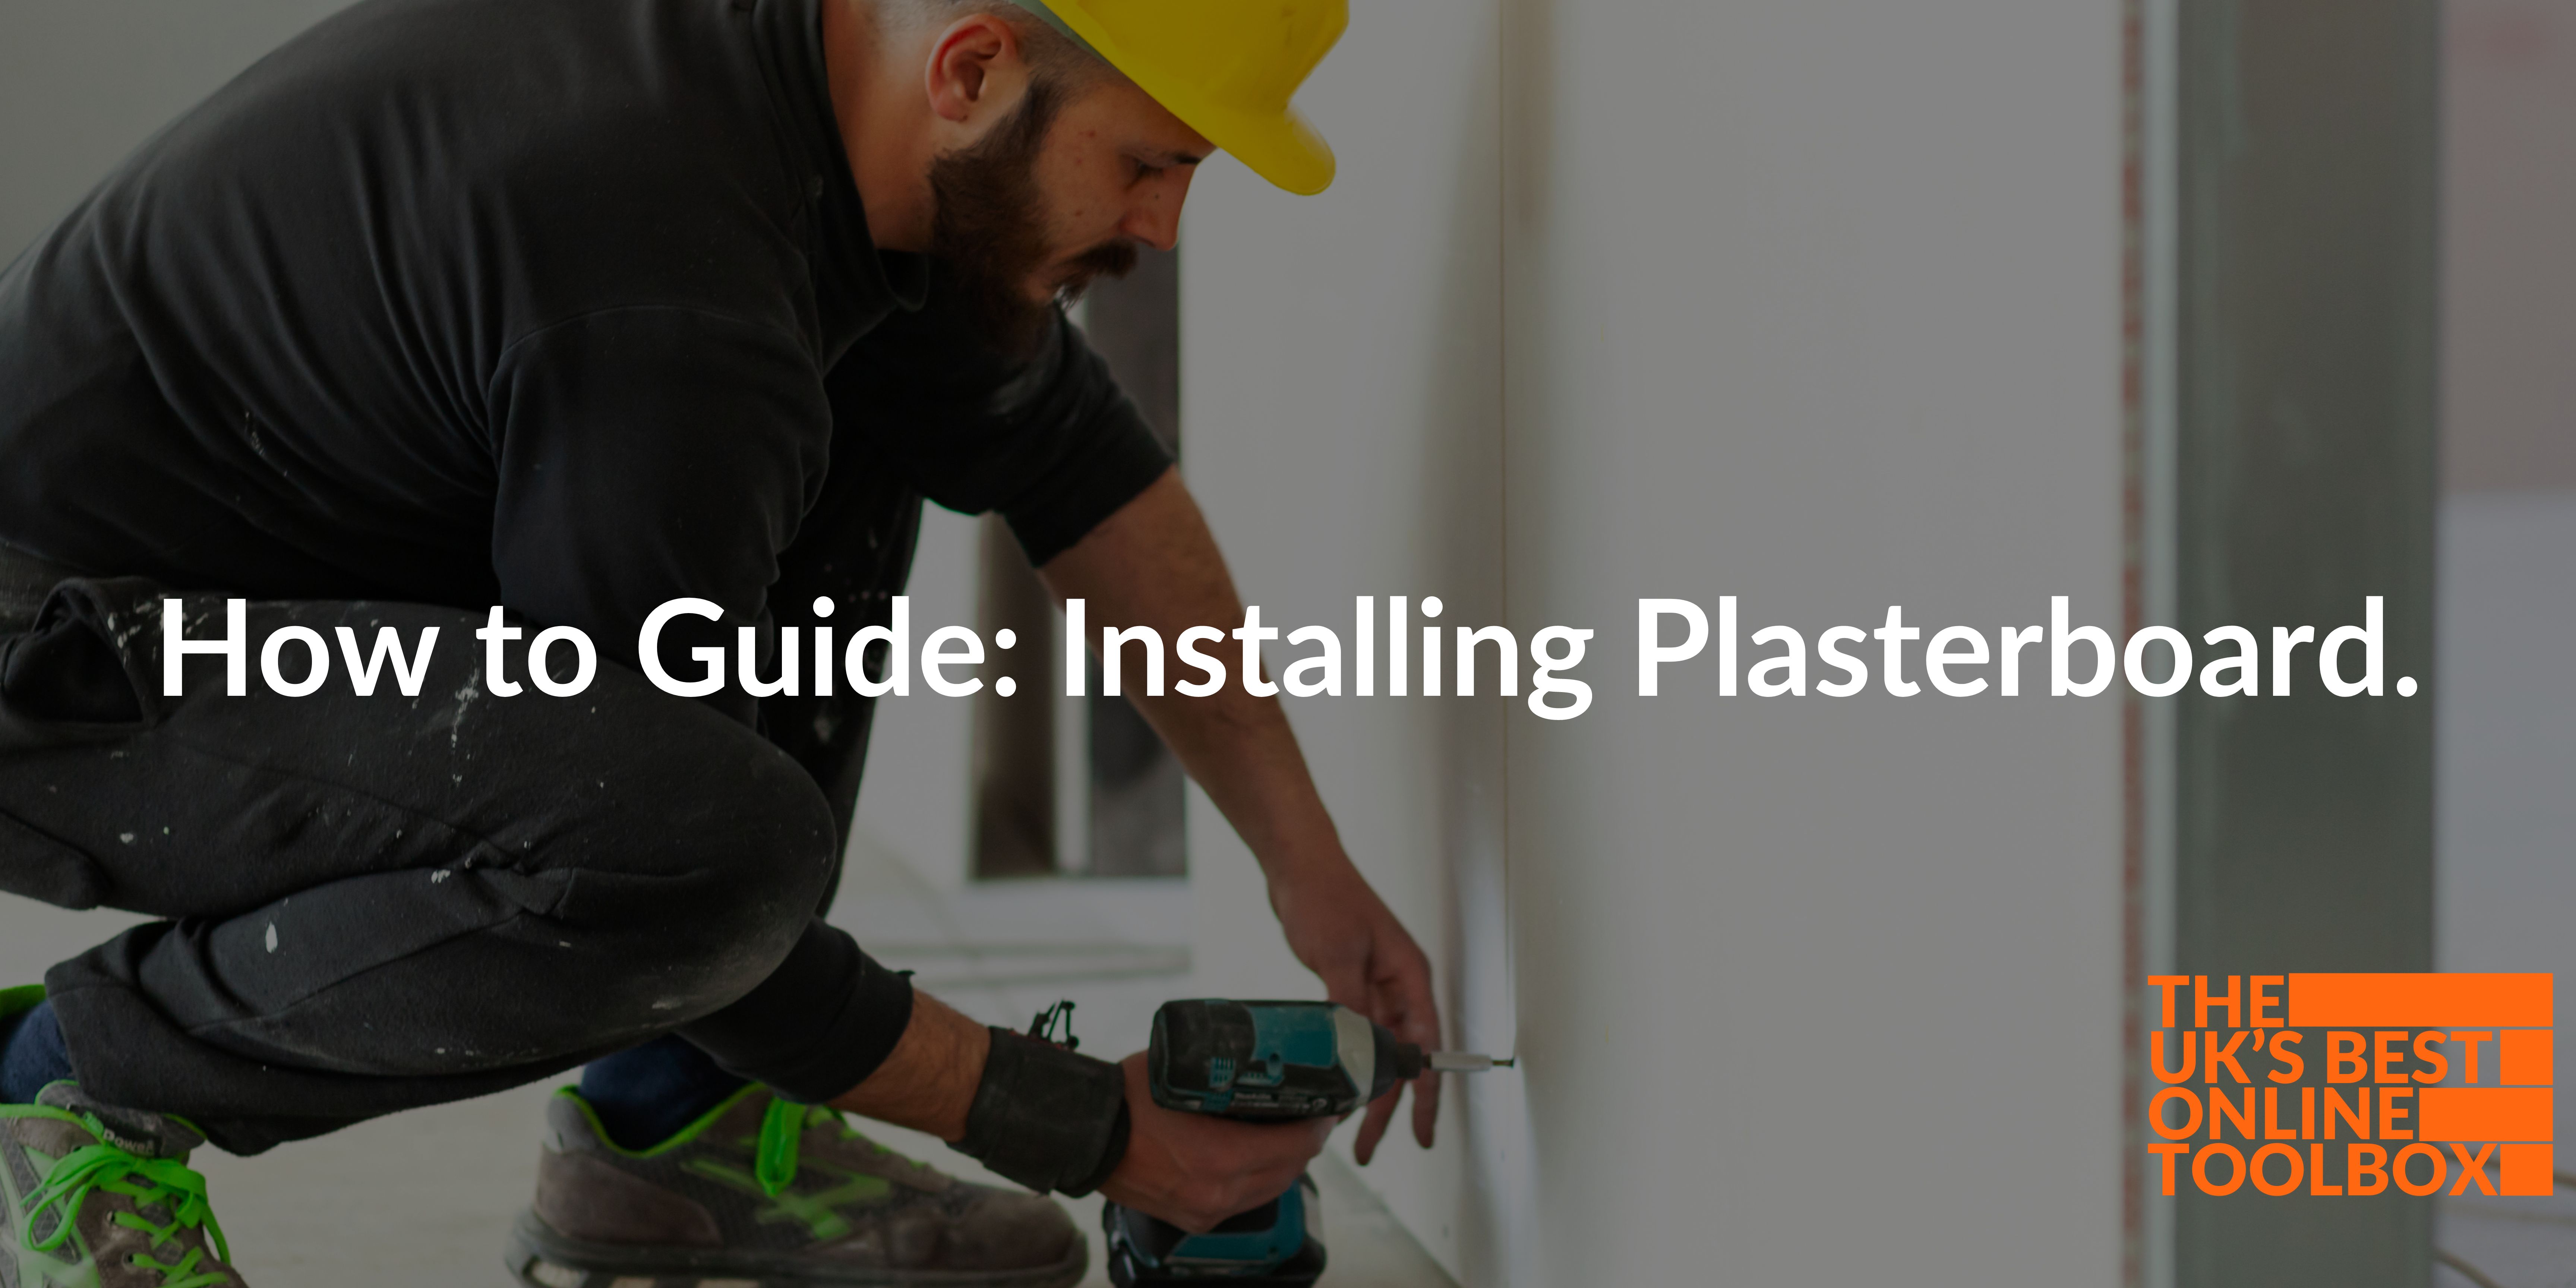 How to install plasterboard, with and without a drill - adhesives, velcro, glue and more